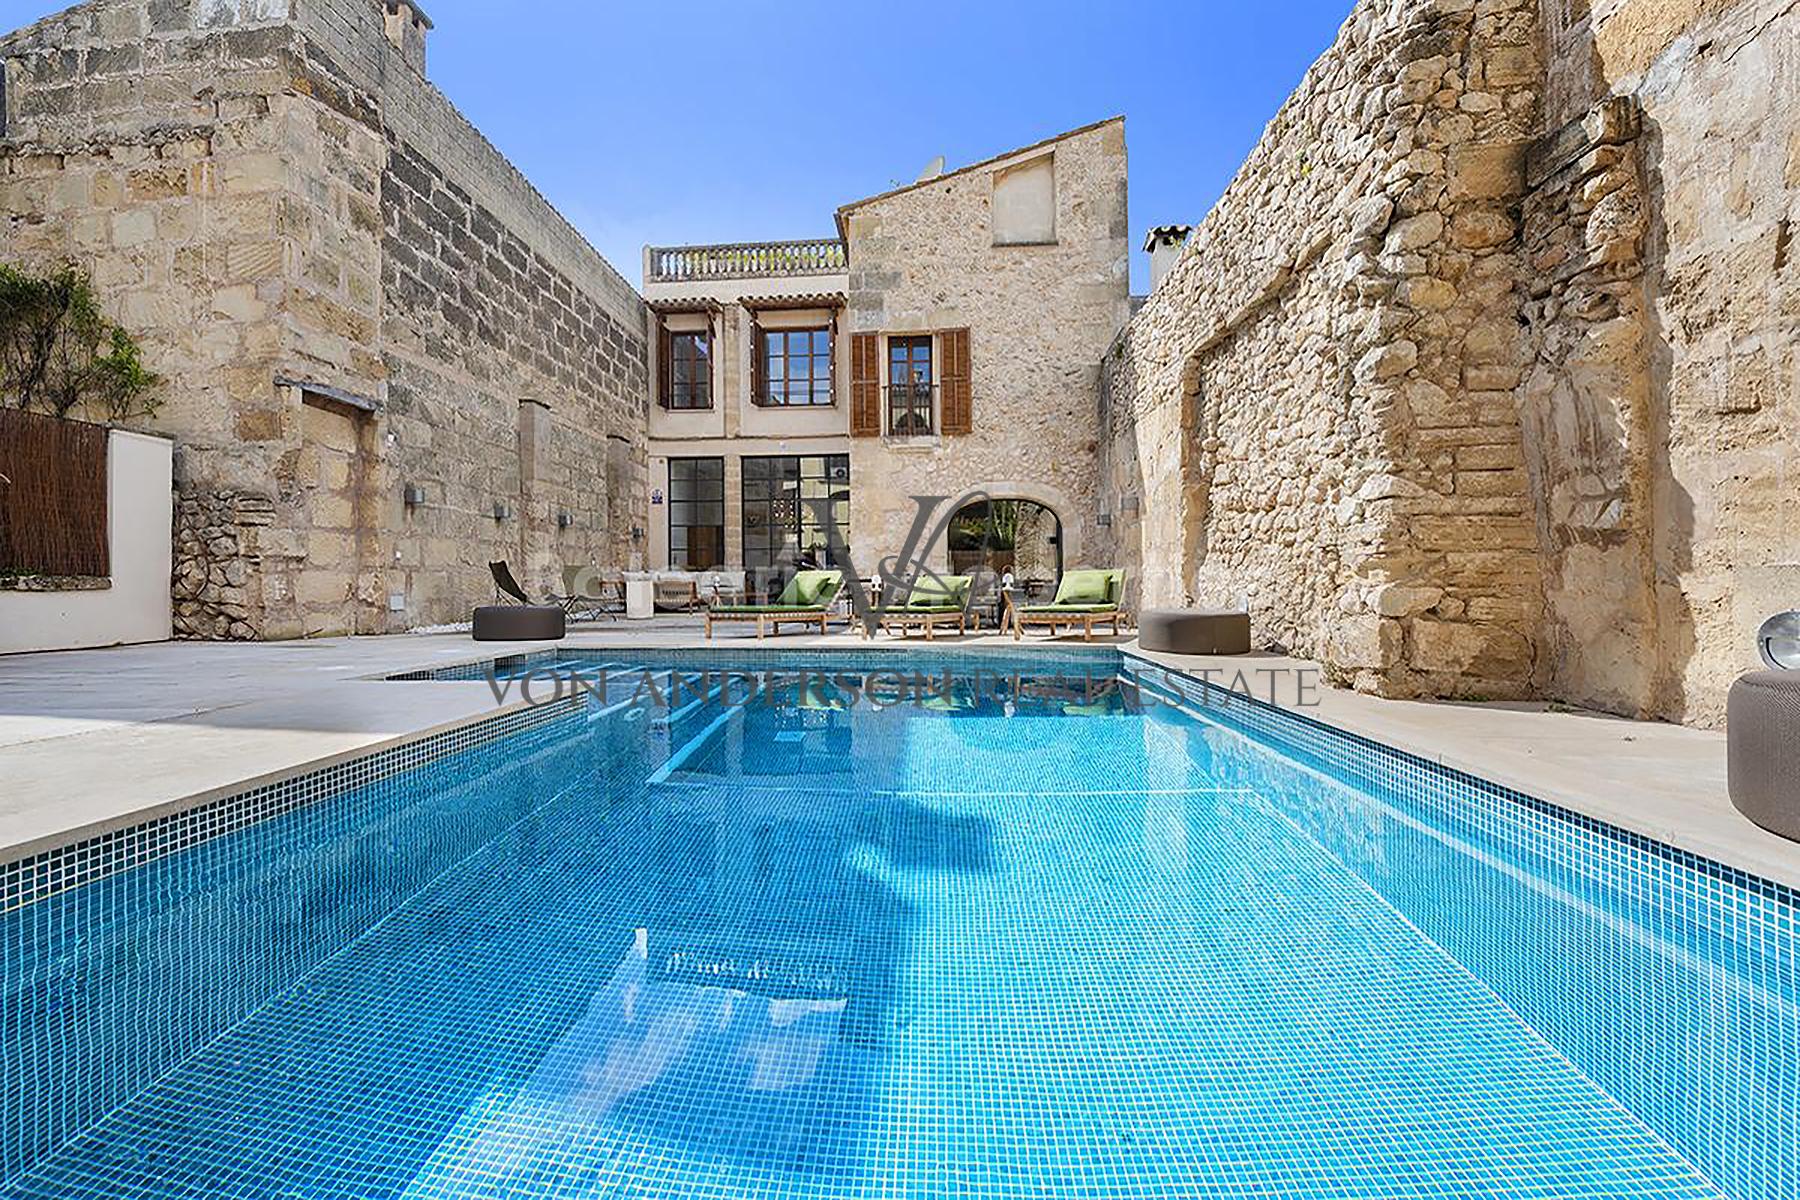 Magnificent Authentic Pollensa Townhouse with 7 Bedrooms and Swimming Pool, ref. VA1056, for sale in Mallorca by Von Anderson Real Estate